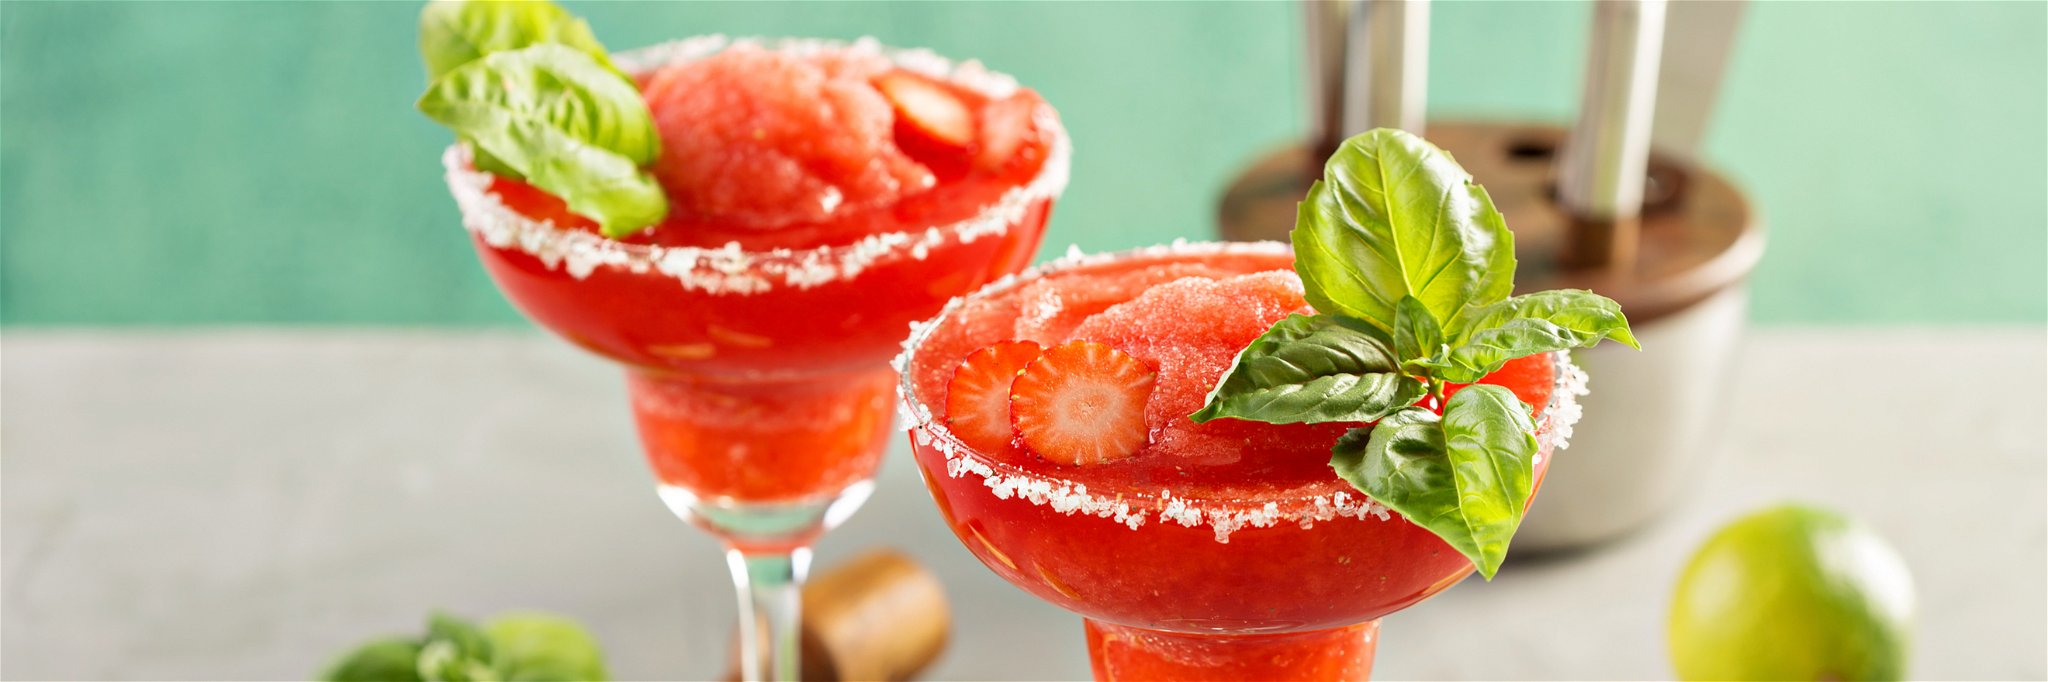 Best strawberry cocktails for every occasion